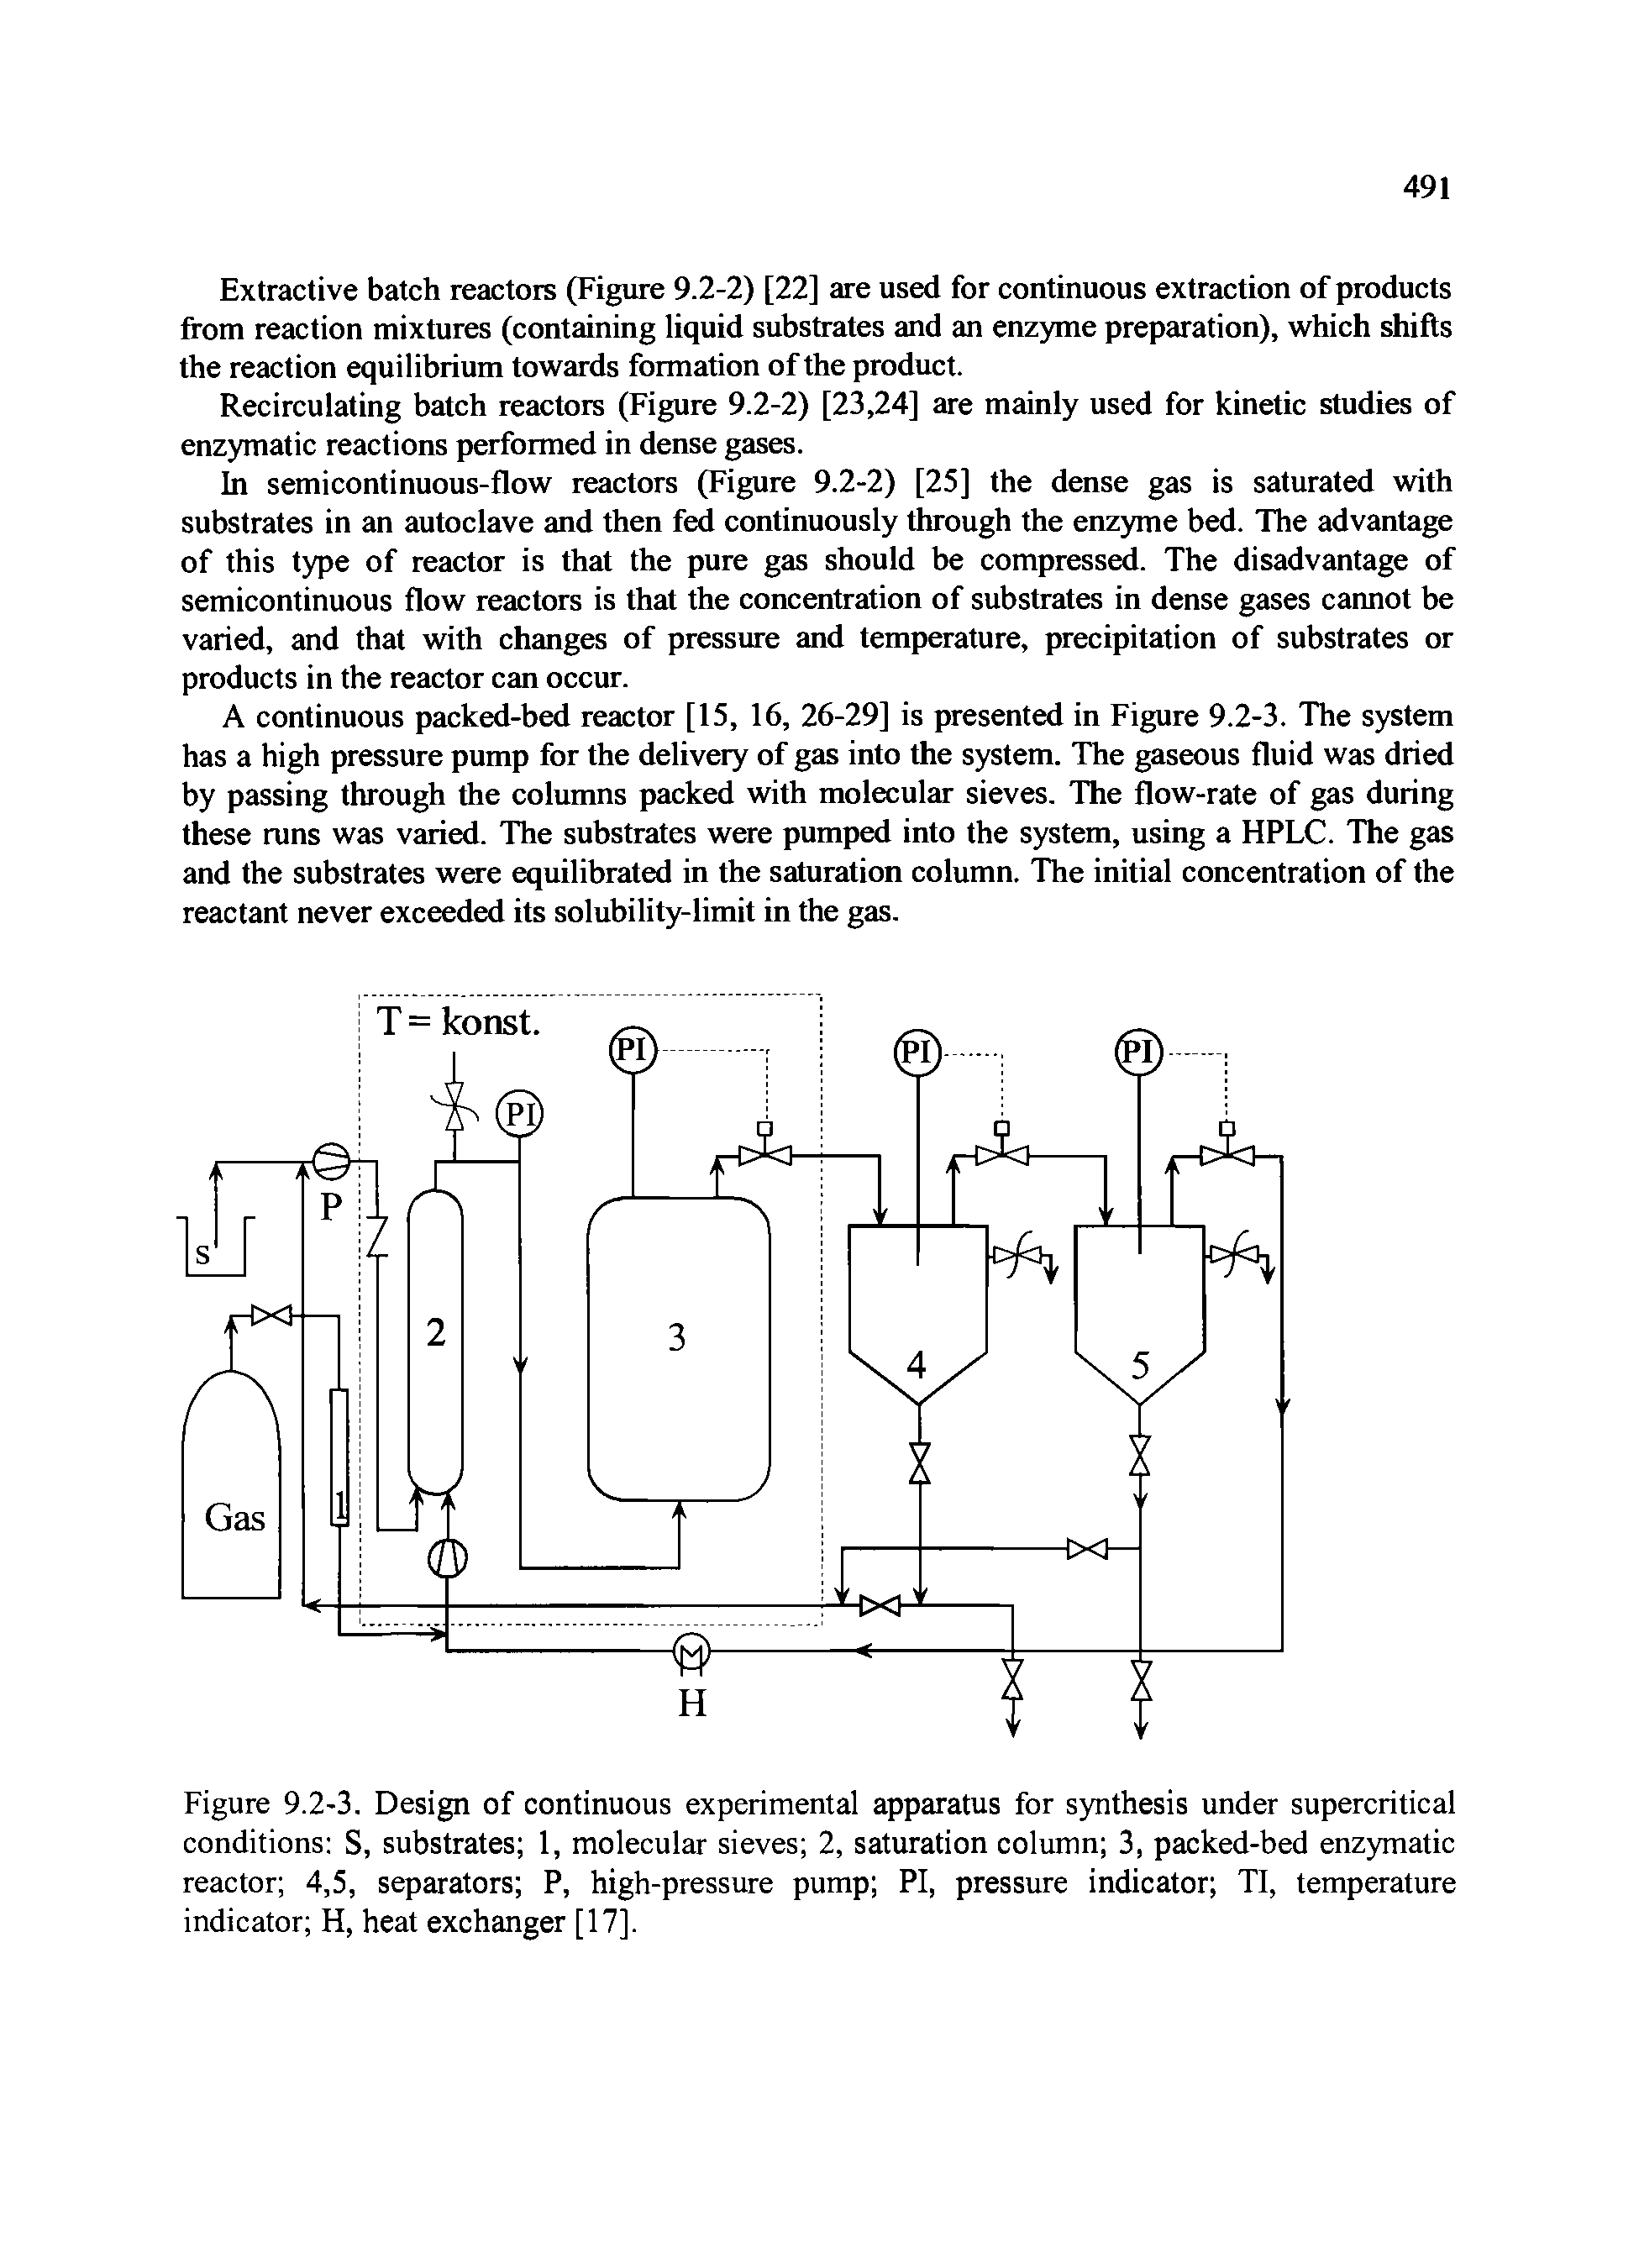 Figure 9.2-3. Design of continuous experimental apparatus for synthesis under supercritical conditions S, substrates 1, molecular sieves 2, saturation column 3, packed-bed enzymatic reactor 4,5, separators P, high-pressure pump PI, pressure indicator TI, temperature indicator H, heat exchanger [17].